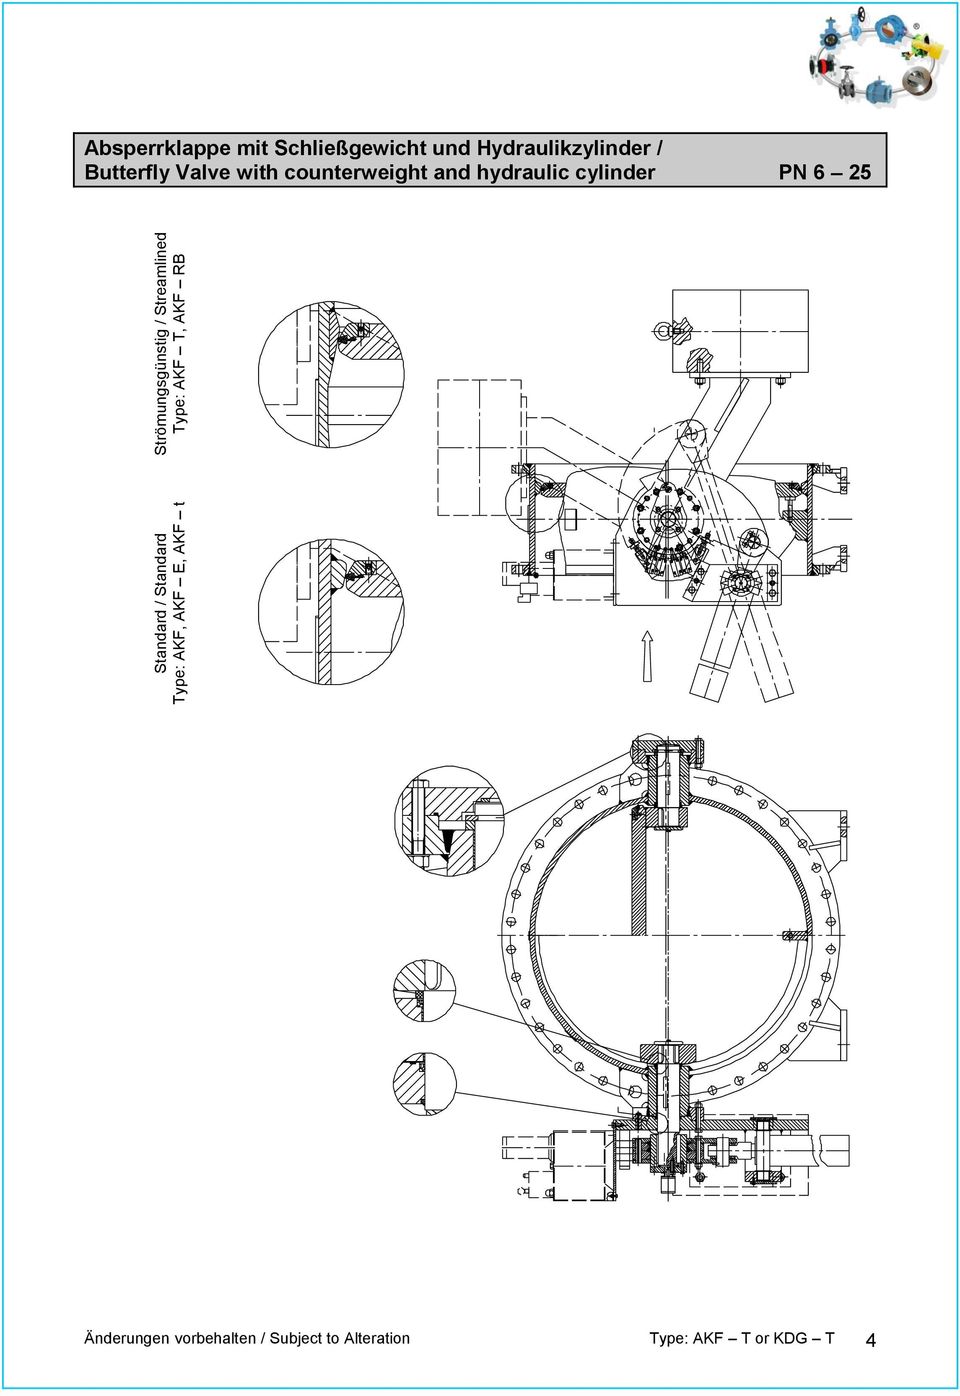 Hydraulikzylinder / Butterfly Valve with counterweight and hydraulic